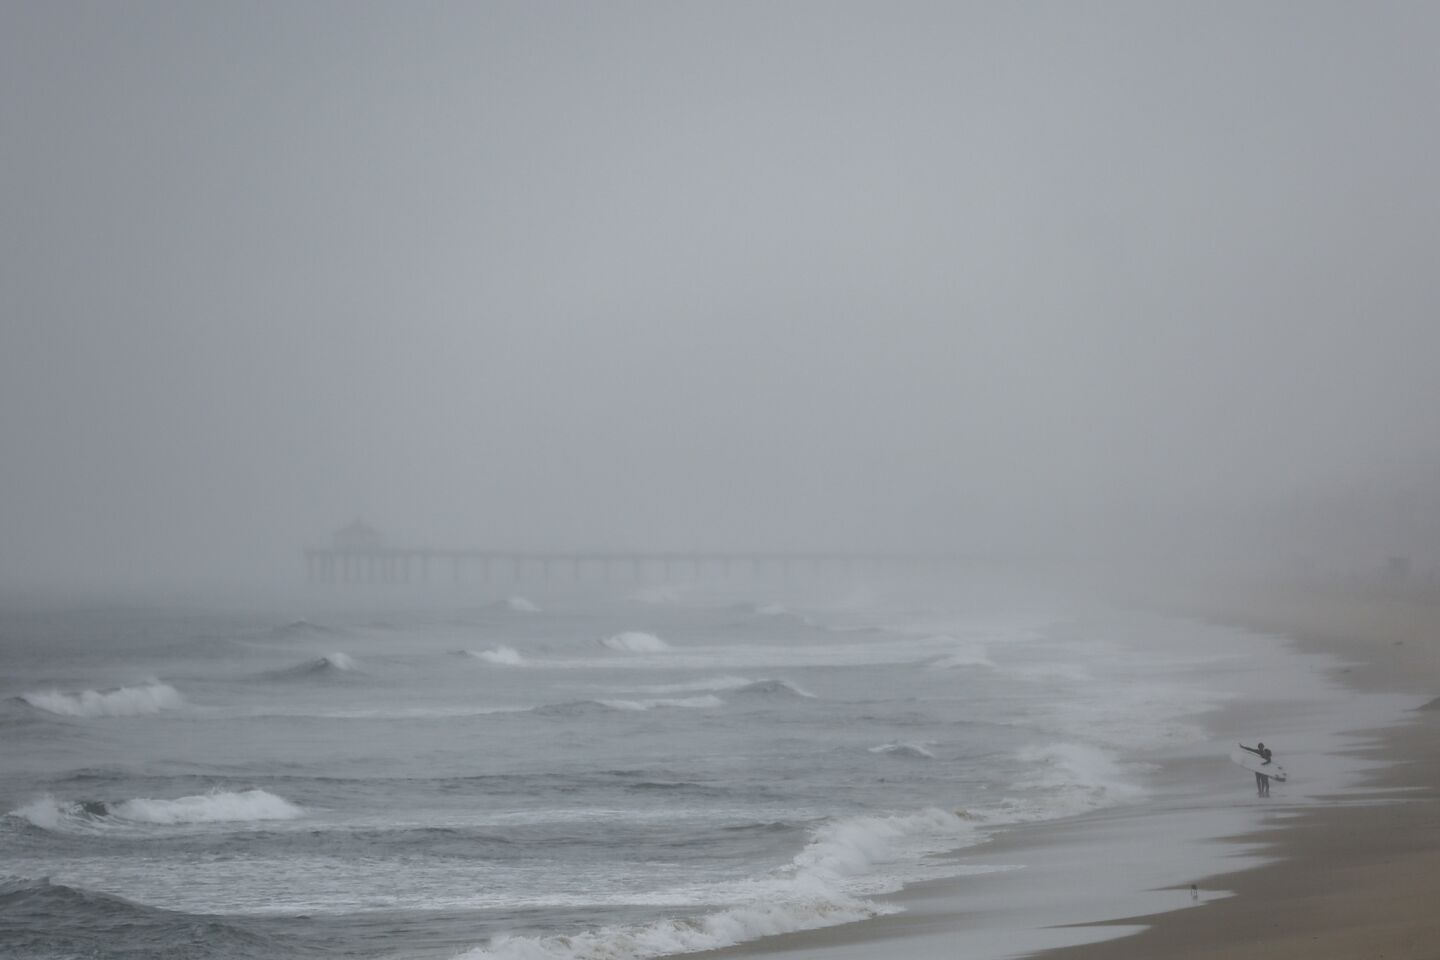 With the Manhattan Beach Pier in the distance, surfers scan the waves of Hermosa Beach.